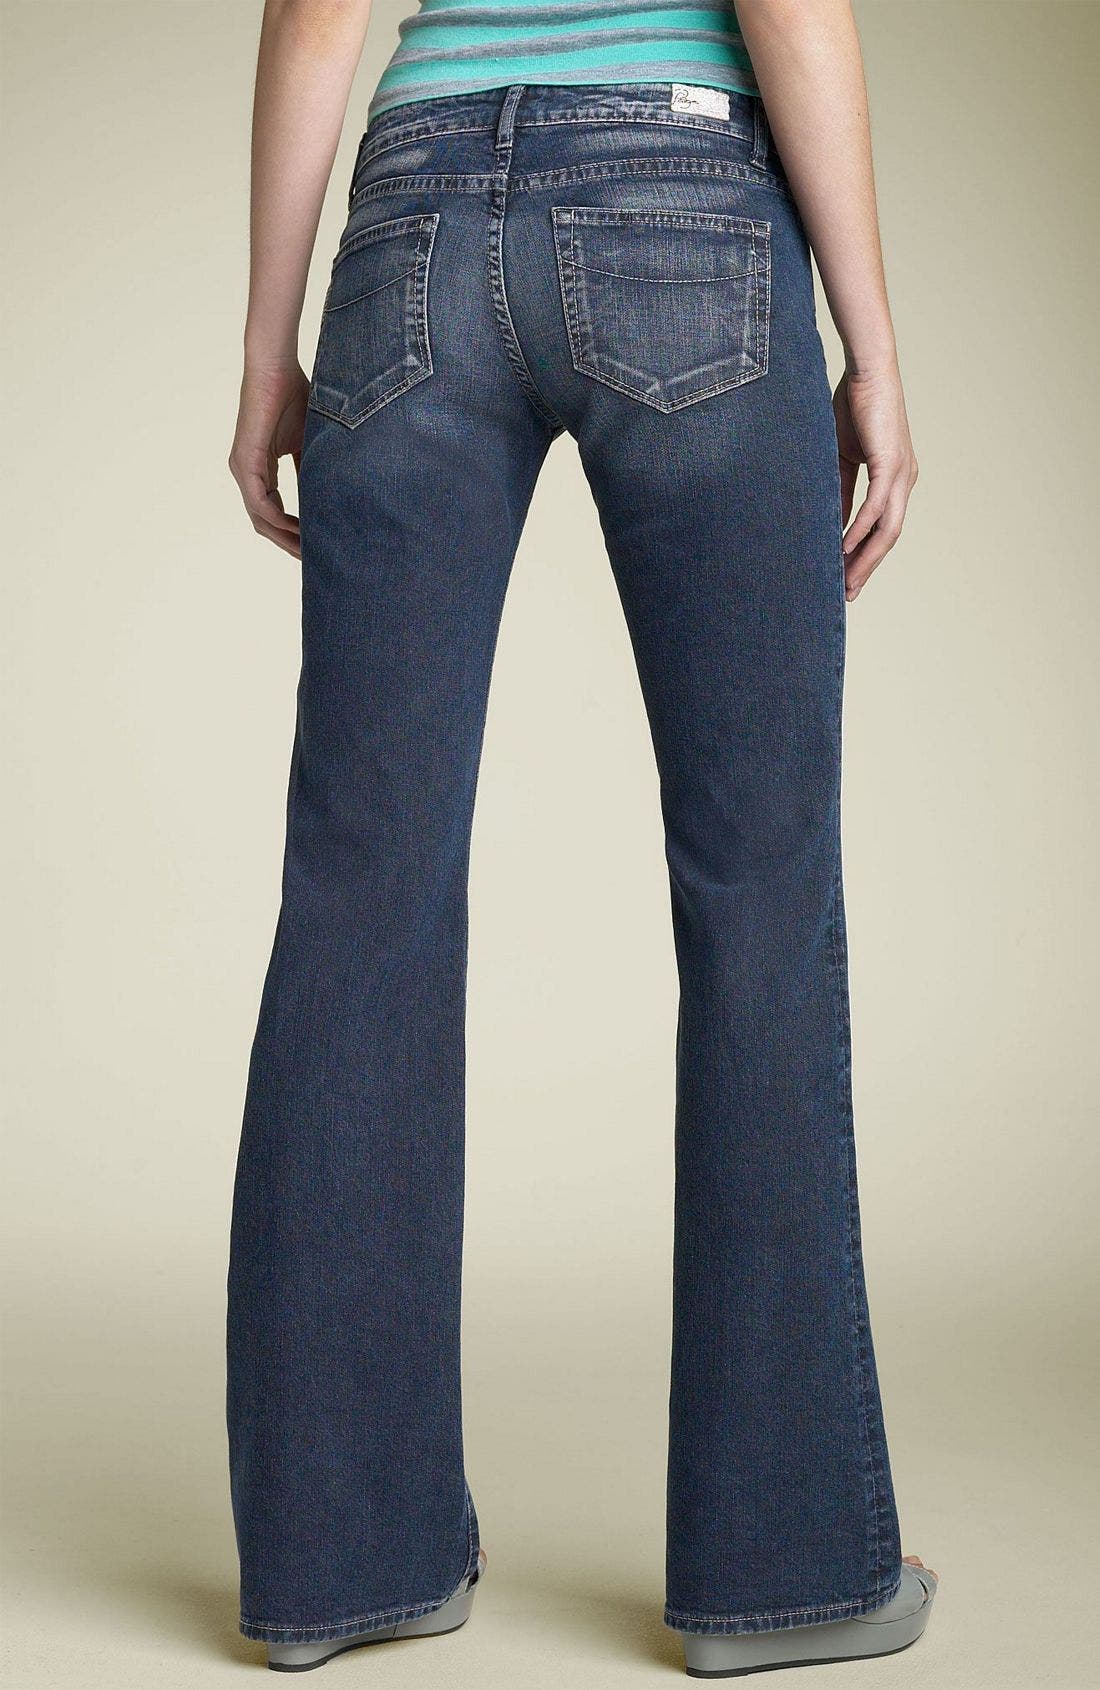 paige benedict canyon jeans